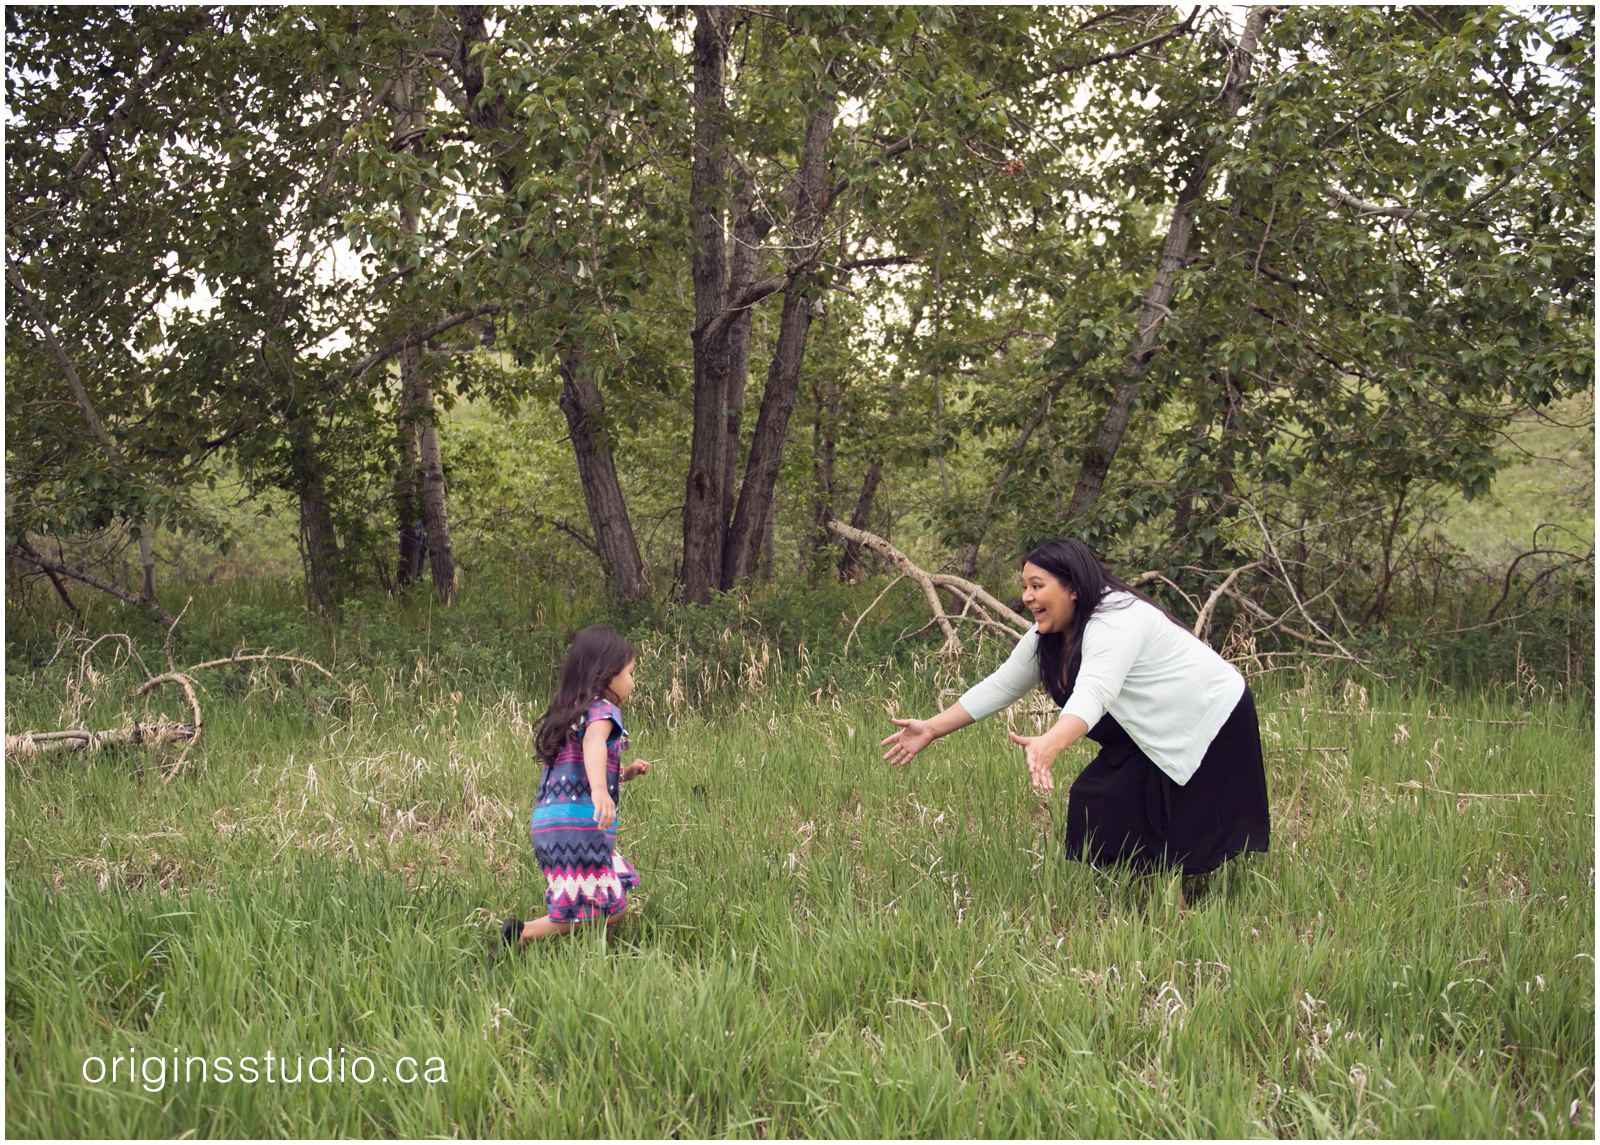 Calgary Photographer, family photographers in Calgary specializing in families children and newborns_0001